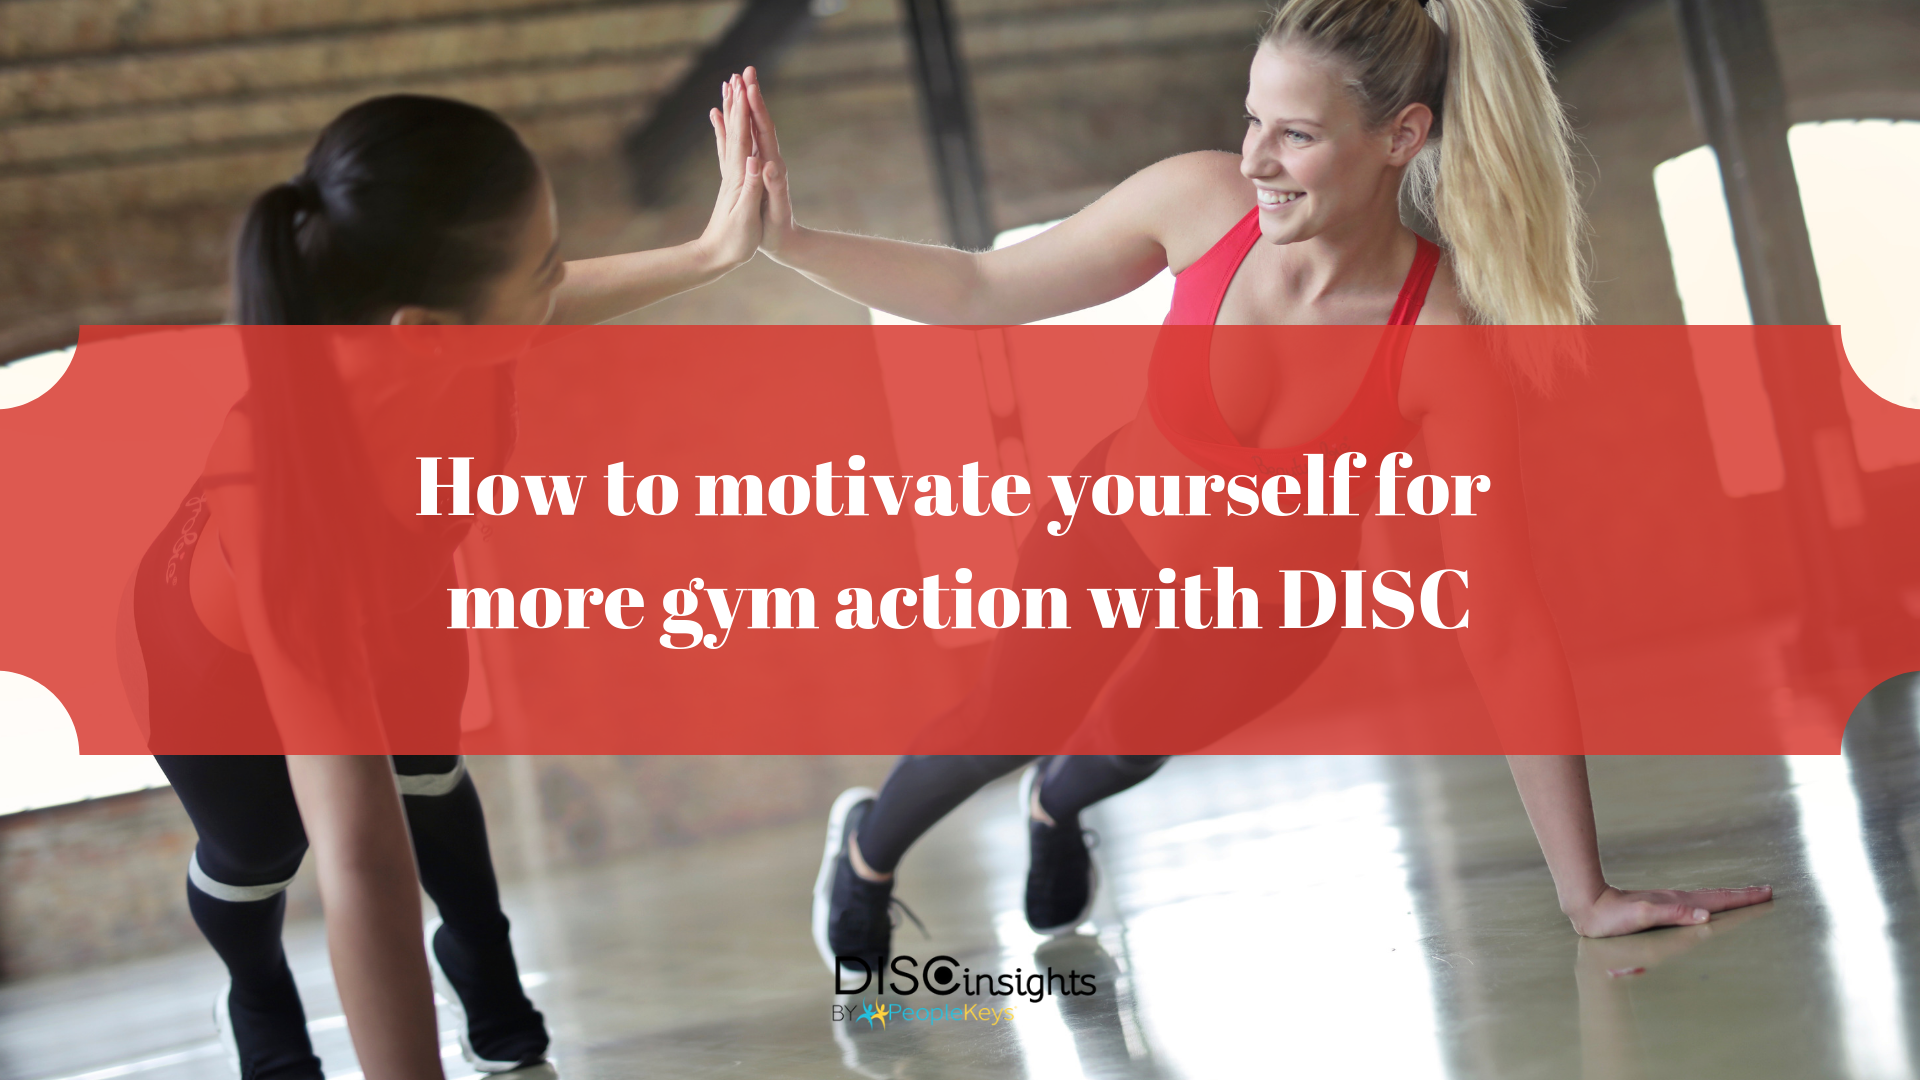 How to motivate yourself for more gym action with DISC